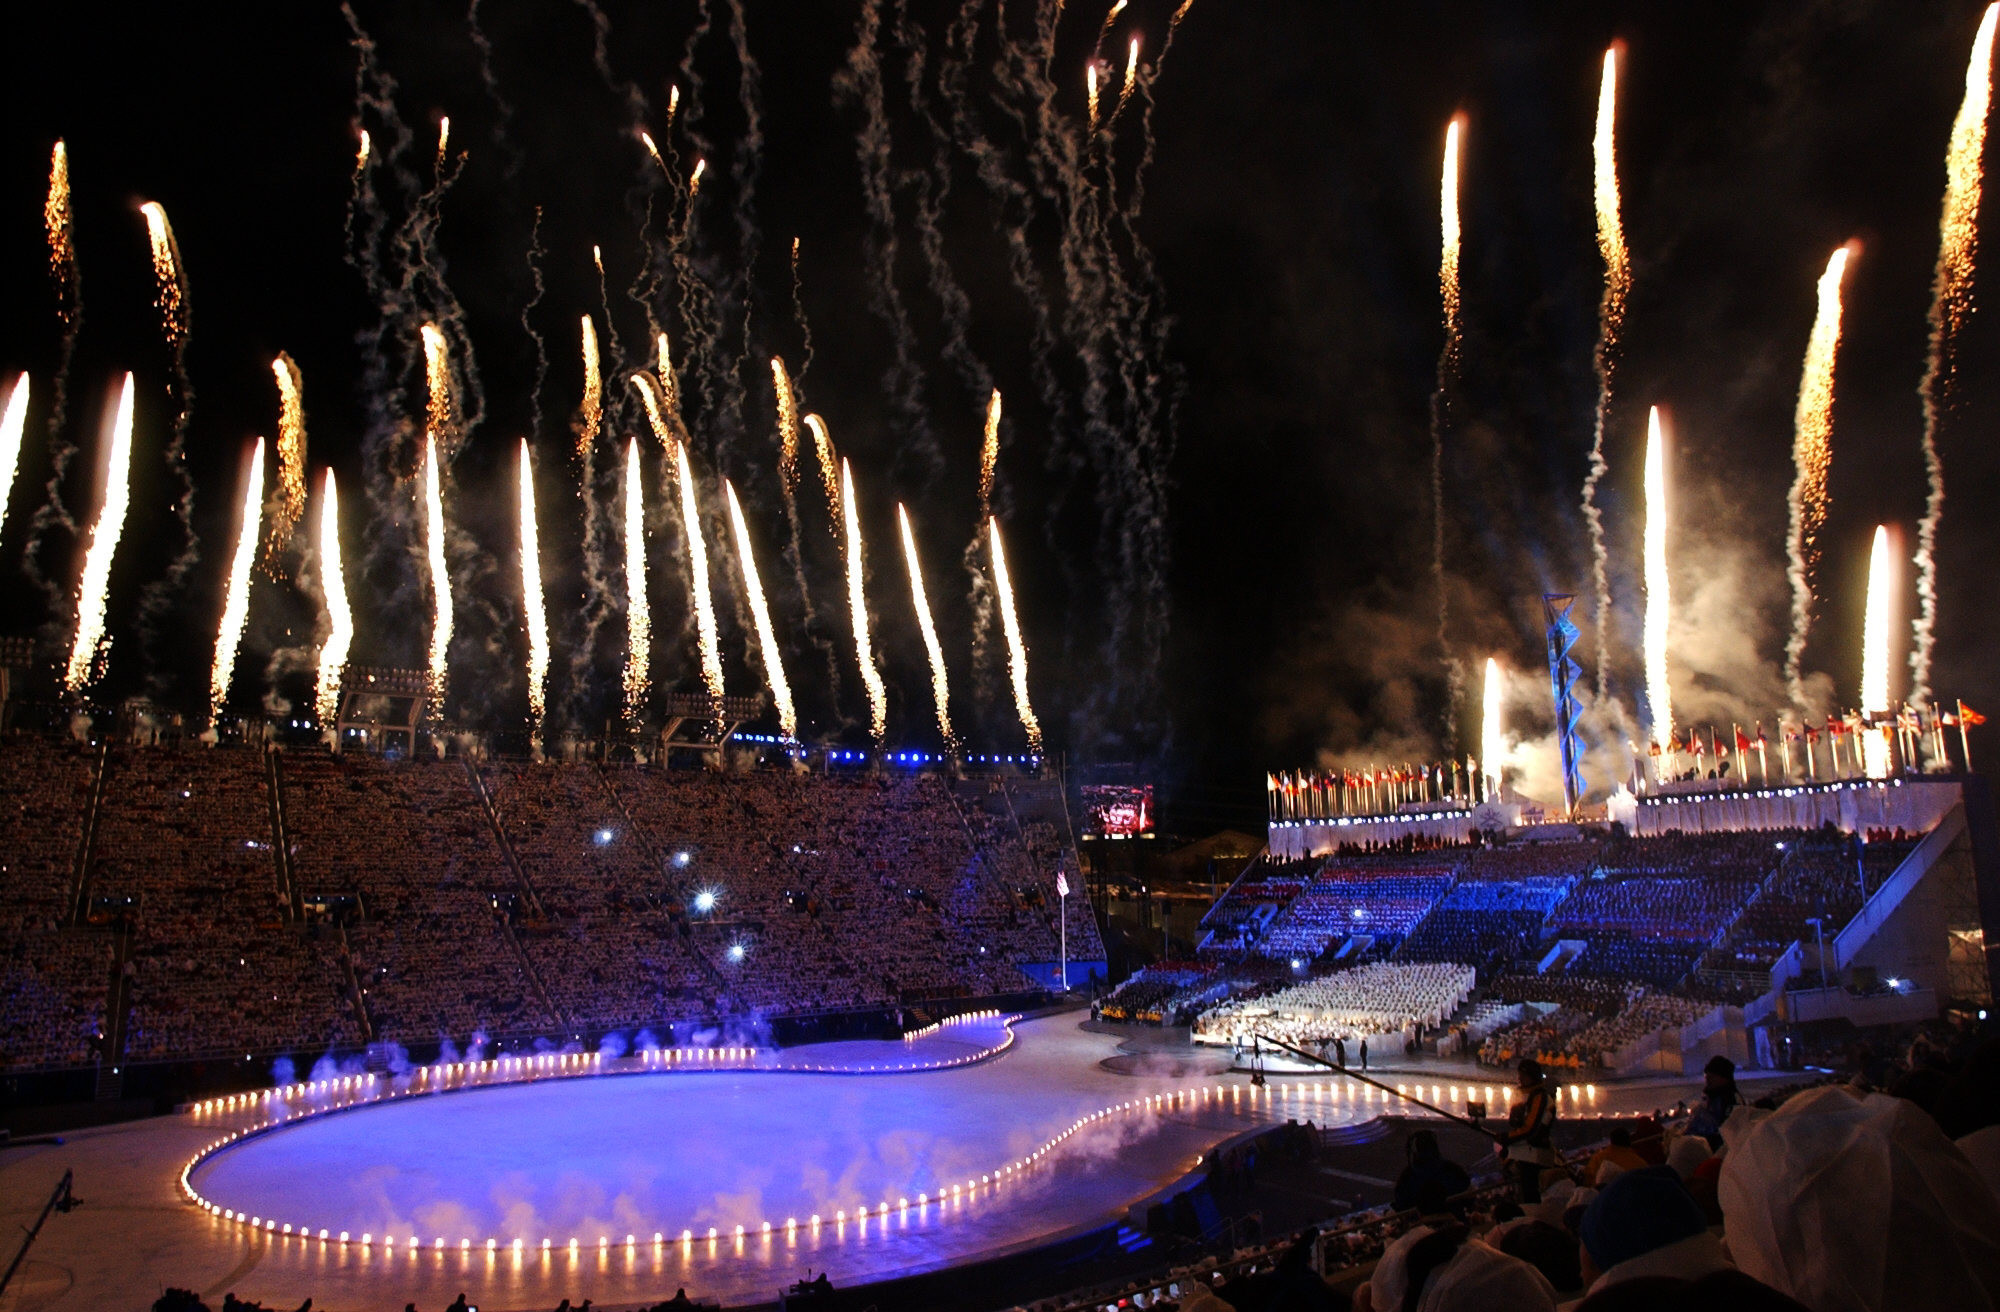 The Rice-Eccles Stadium hosted the Opening and Closing Ceremonies of the 2002 Winter Olympics too ©Getty Images